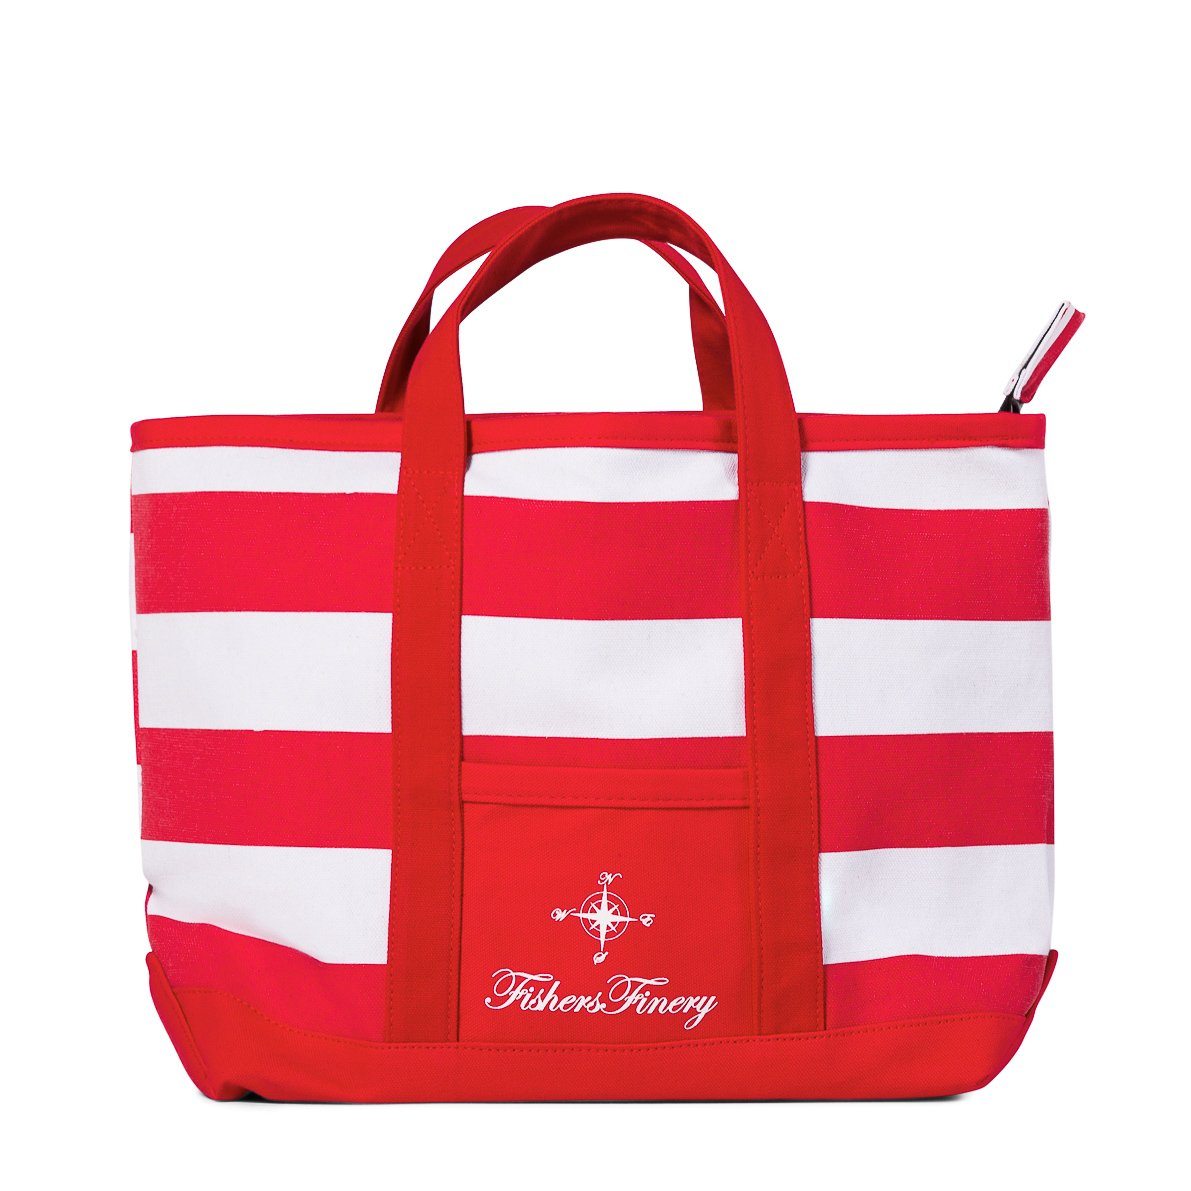 Canvas Travel Tote with Zipper Closure - Multiple Sizes and Colors Home>Luggage Fishers Finery Red Medium 